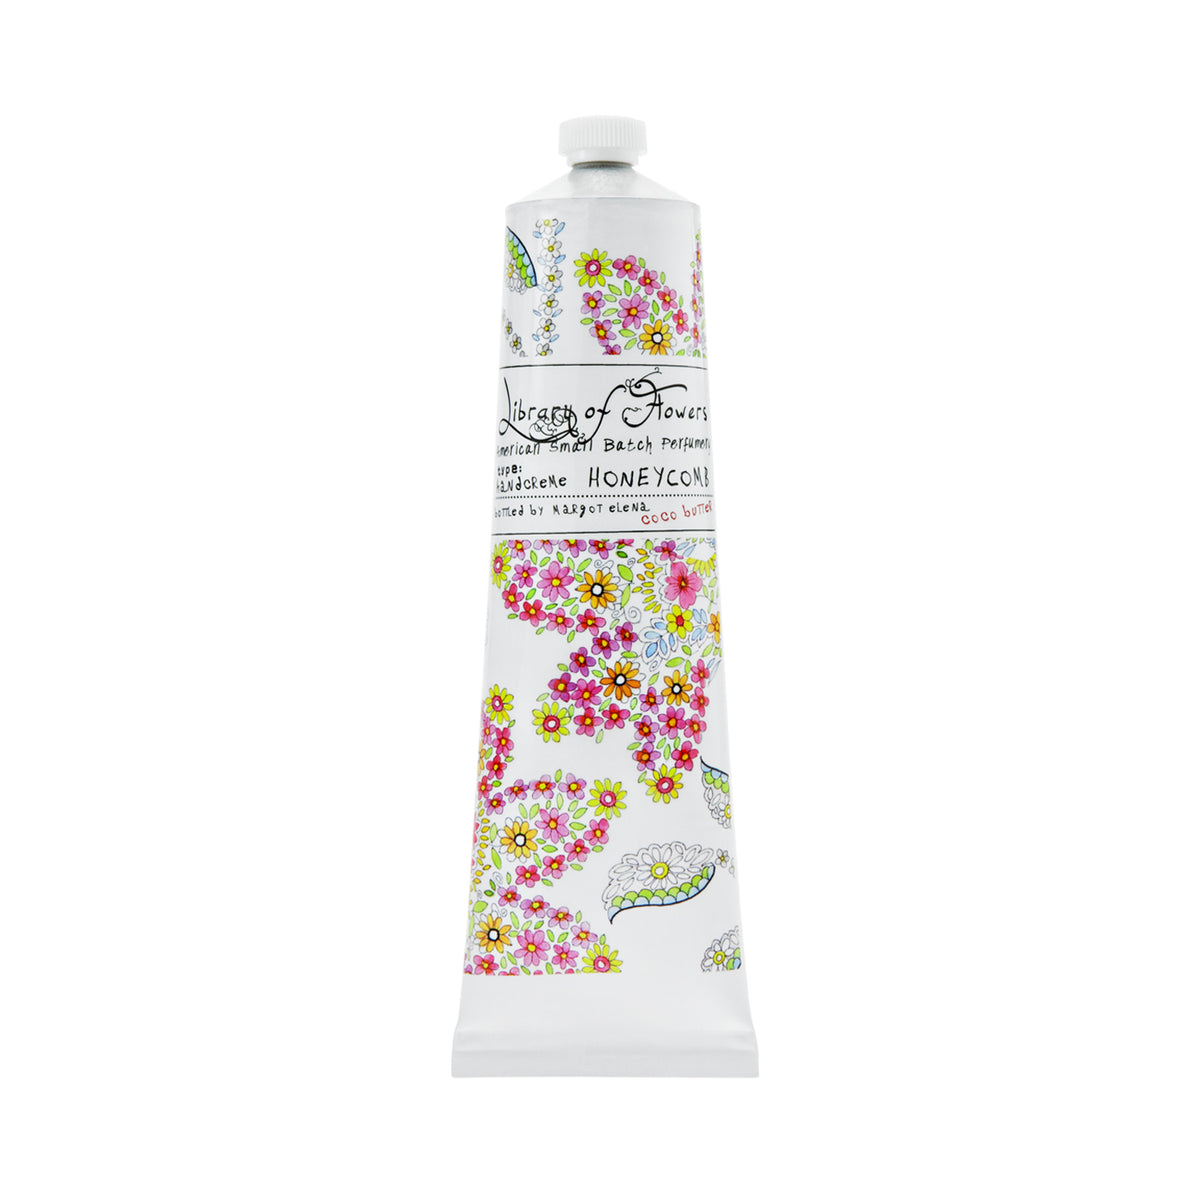 A tall, slender tube of Library of Flowers Honeycomb Hand Creme enriched with shea butter, decorated with a colorful floral and honeycomb pattern and elegant text detailing the Margot Elena brand and product scent.